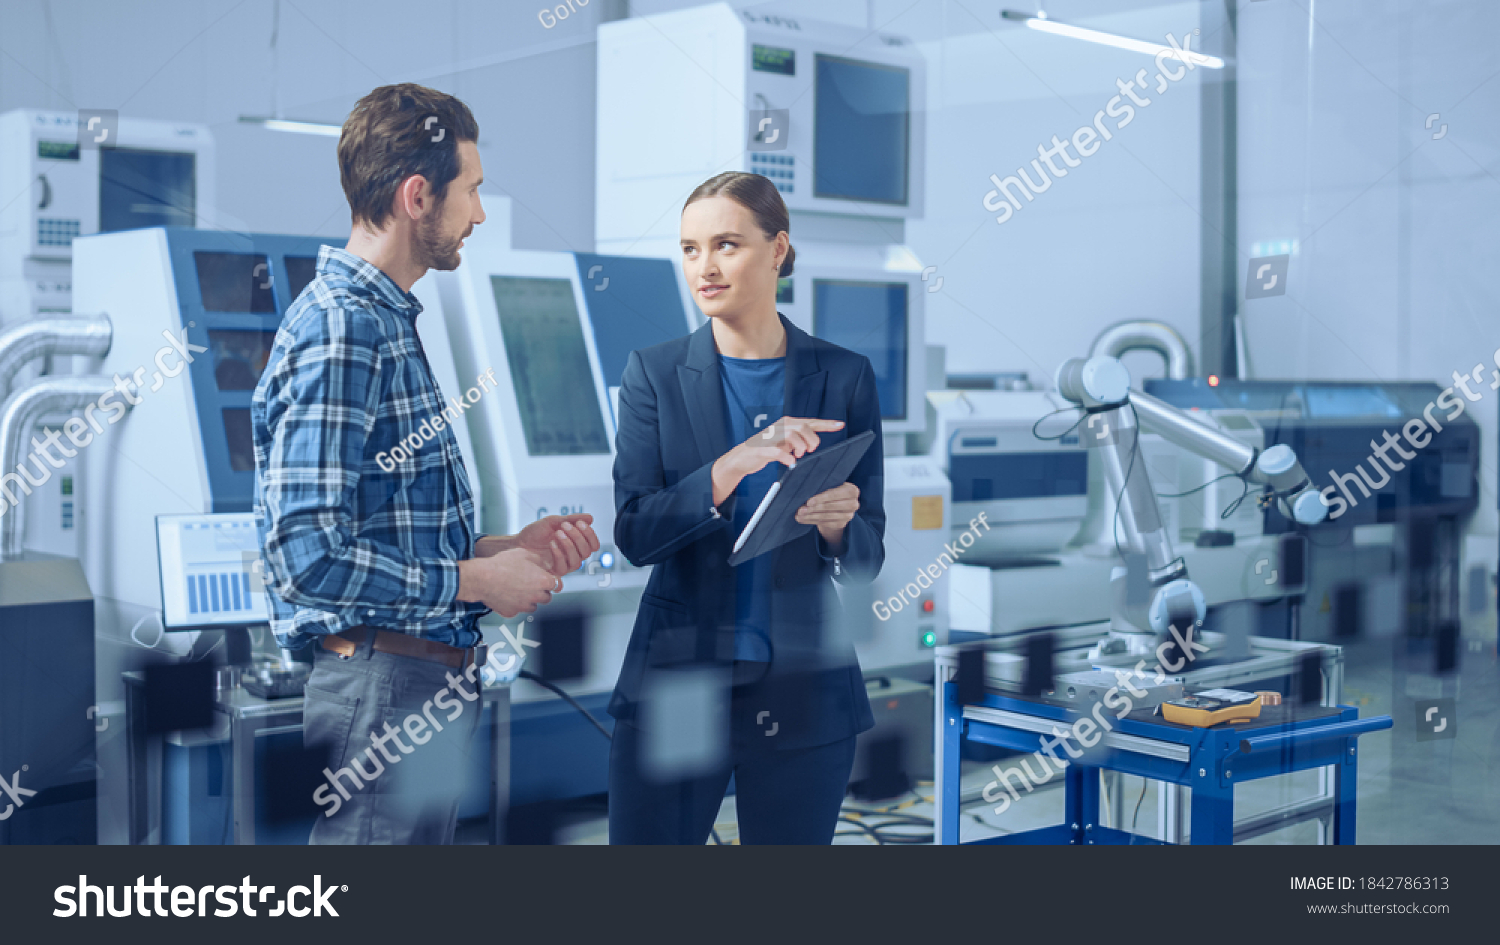 Modern Factory: Female Project Manager and Male Engineer Standing, Talking, Using Digital Tablet for Programming and Monitoring Assembly Line. Industry 4.0 Facility with High-Tech CNC Machinery #1842786313